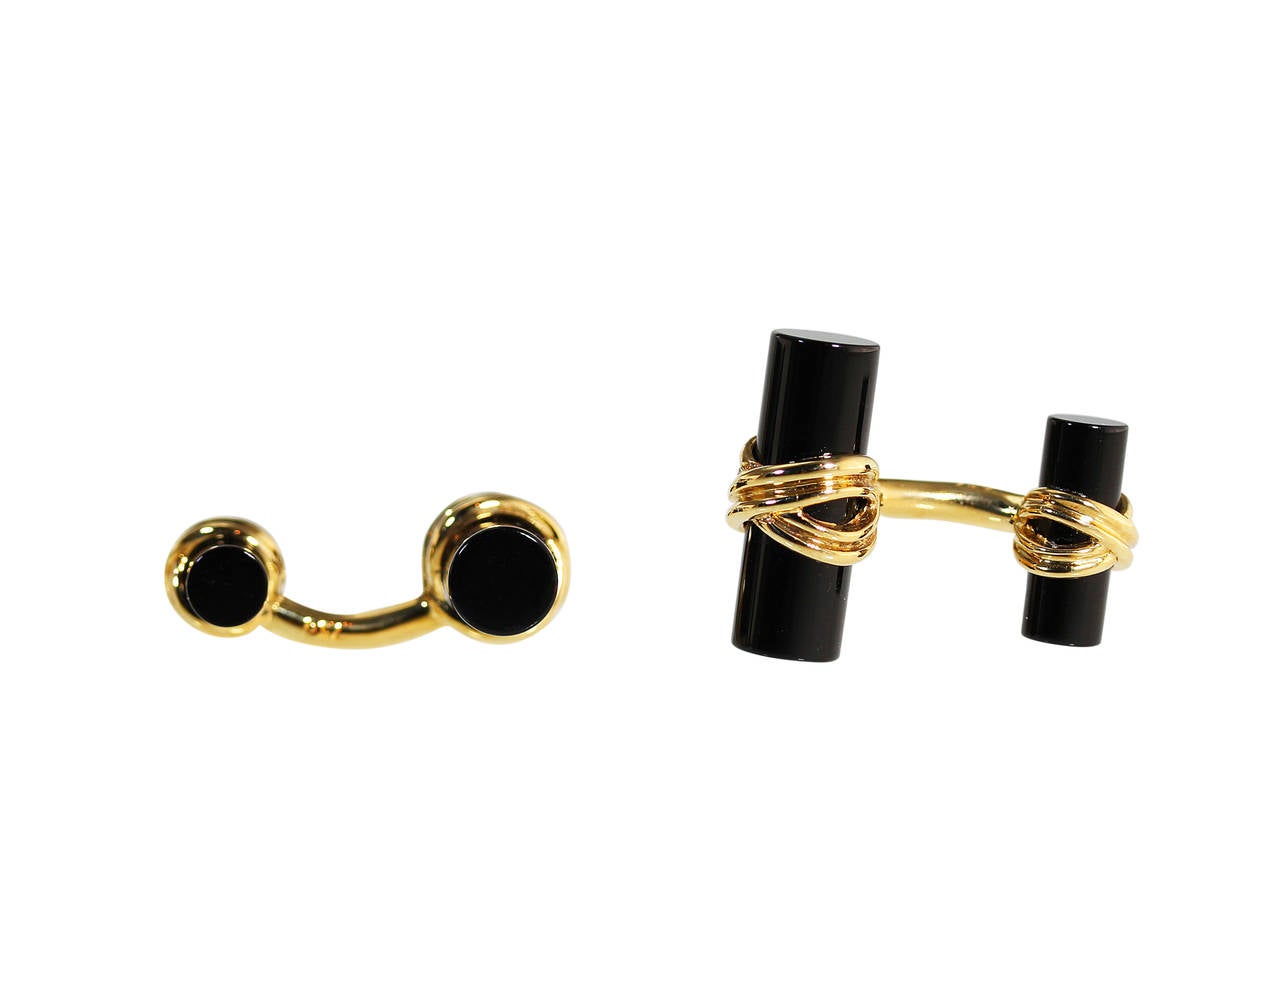 A pair of 18 karat yellow gold and onyx cufflinks by Tiffany & Co., the terminals composed of carved onyx circular bars wrapped in polished gold, gross weight 13.5 grams, measuring 1 by 3/4 inches, signed Tiffany & Co., stamped 750, with signed